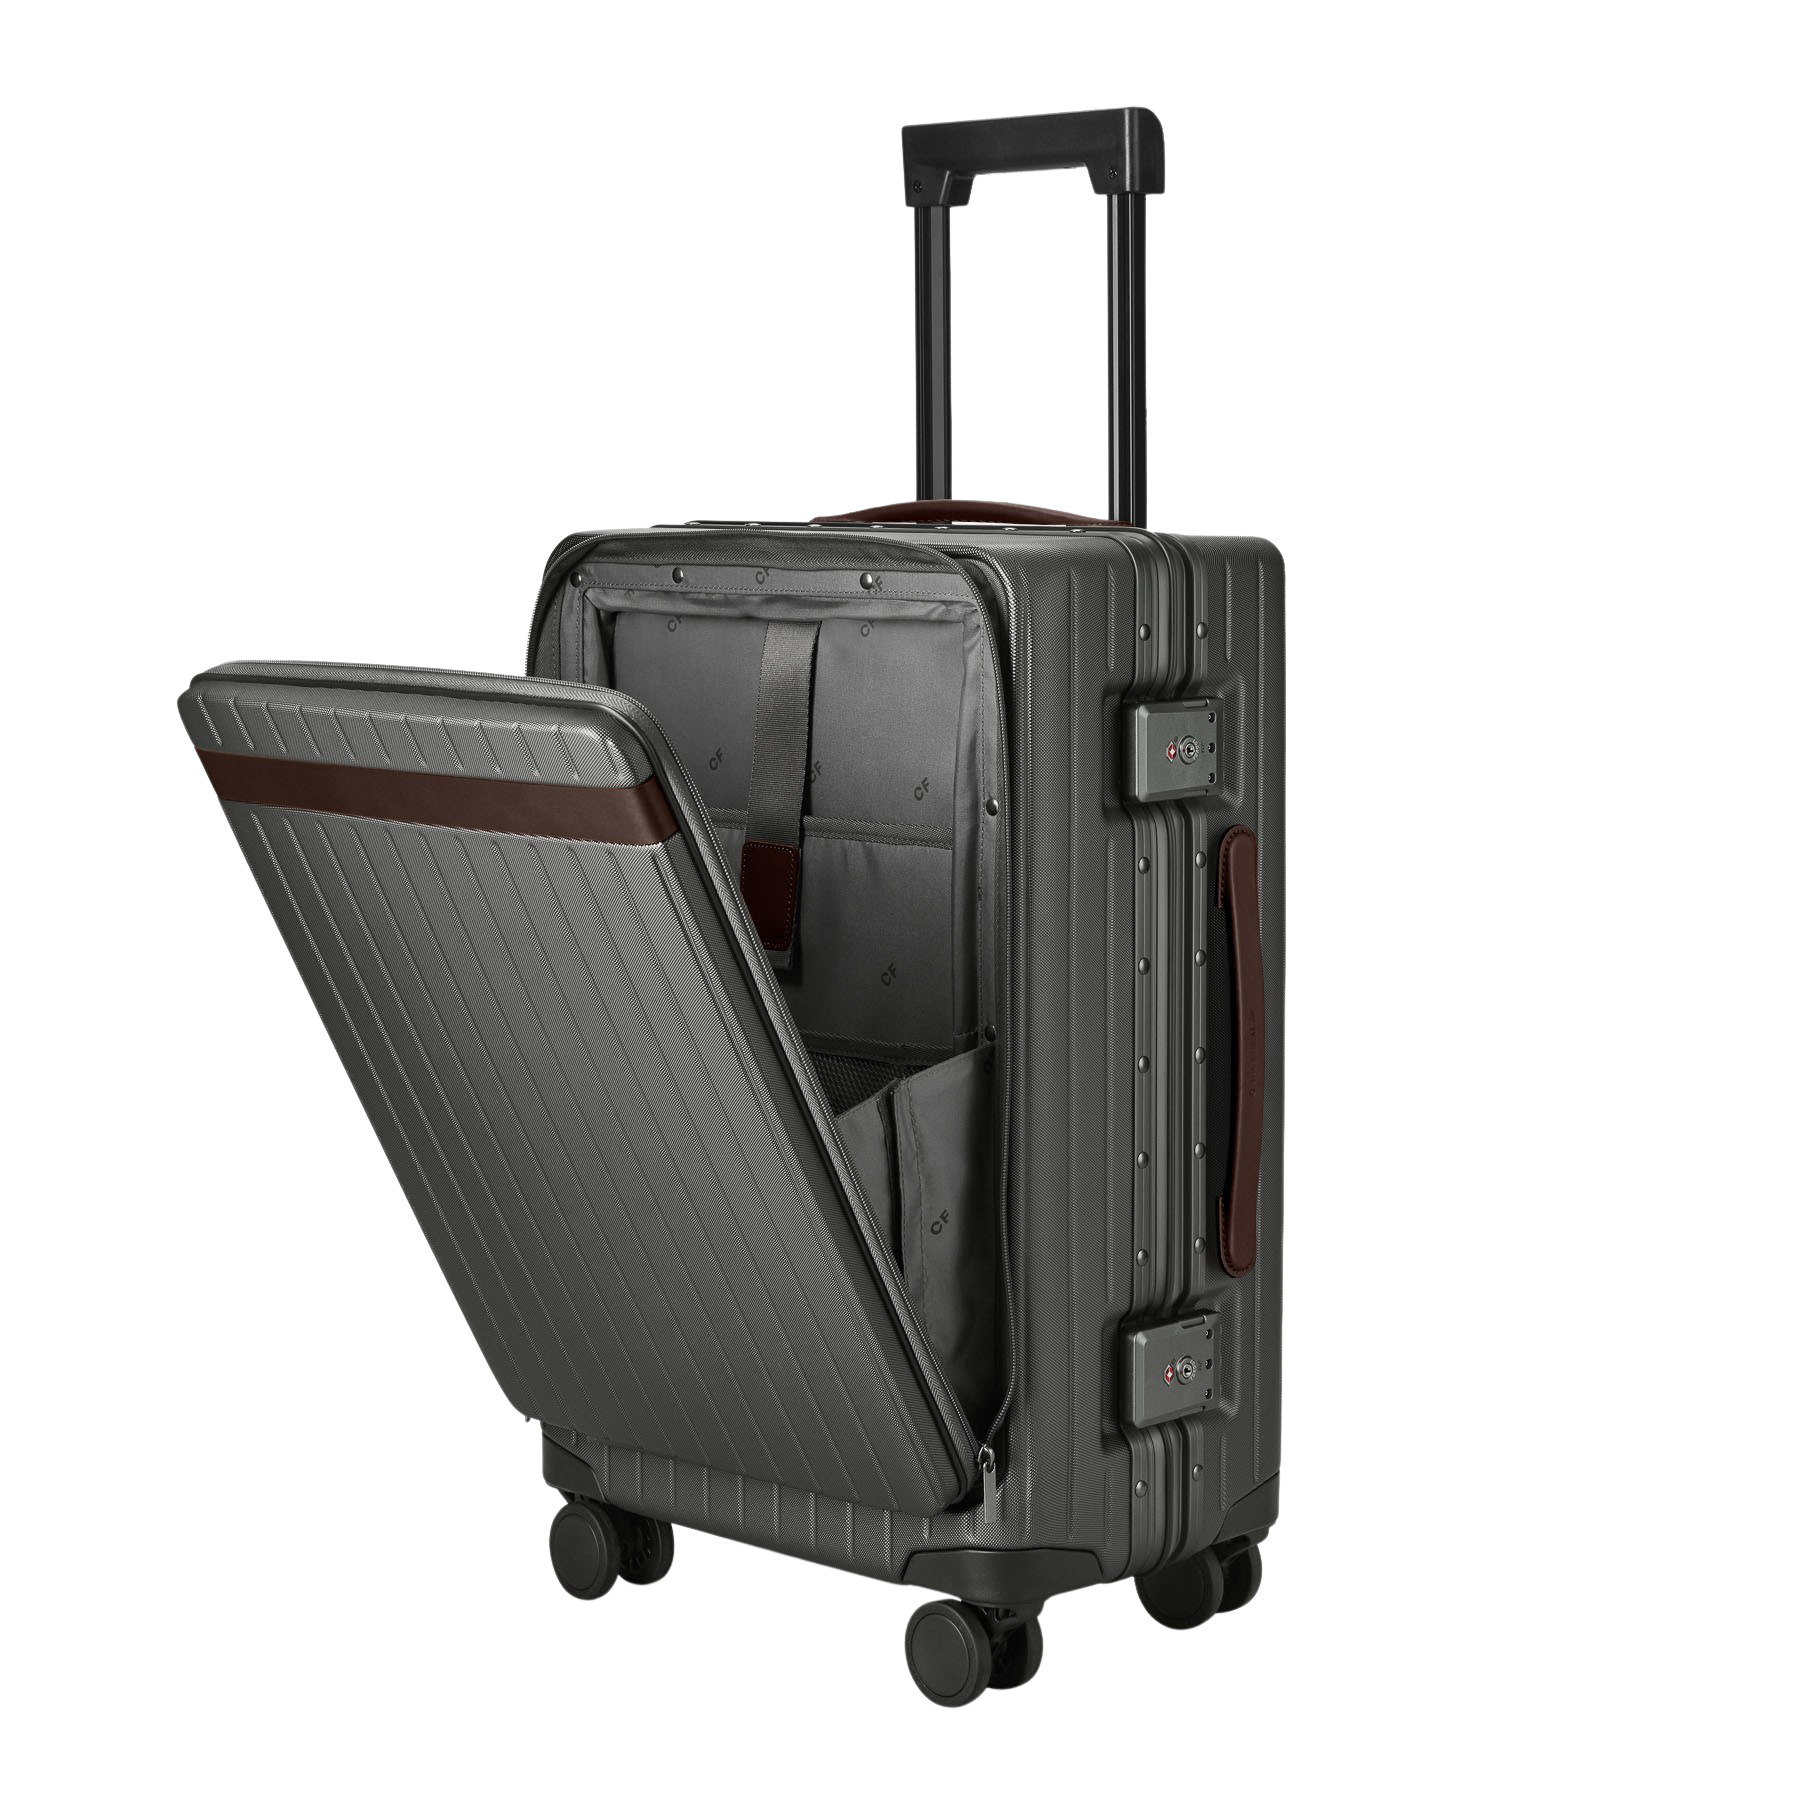 An image of a Carl Friedrik Polycarbonate Chocolate Leather Carry-on Pro suitcase on wheels with a laptop compartment.